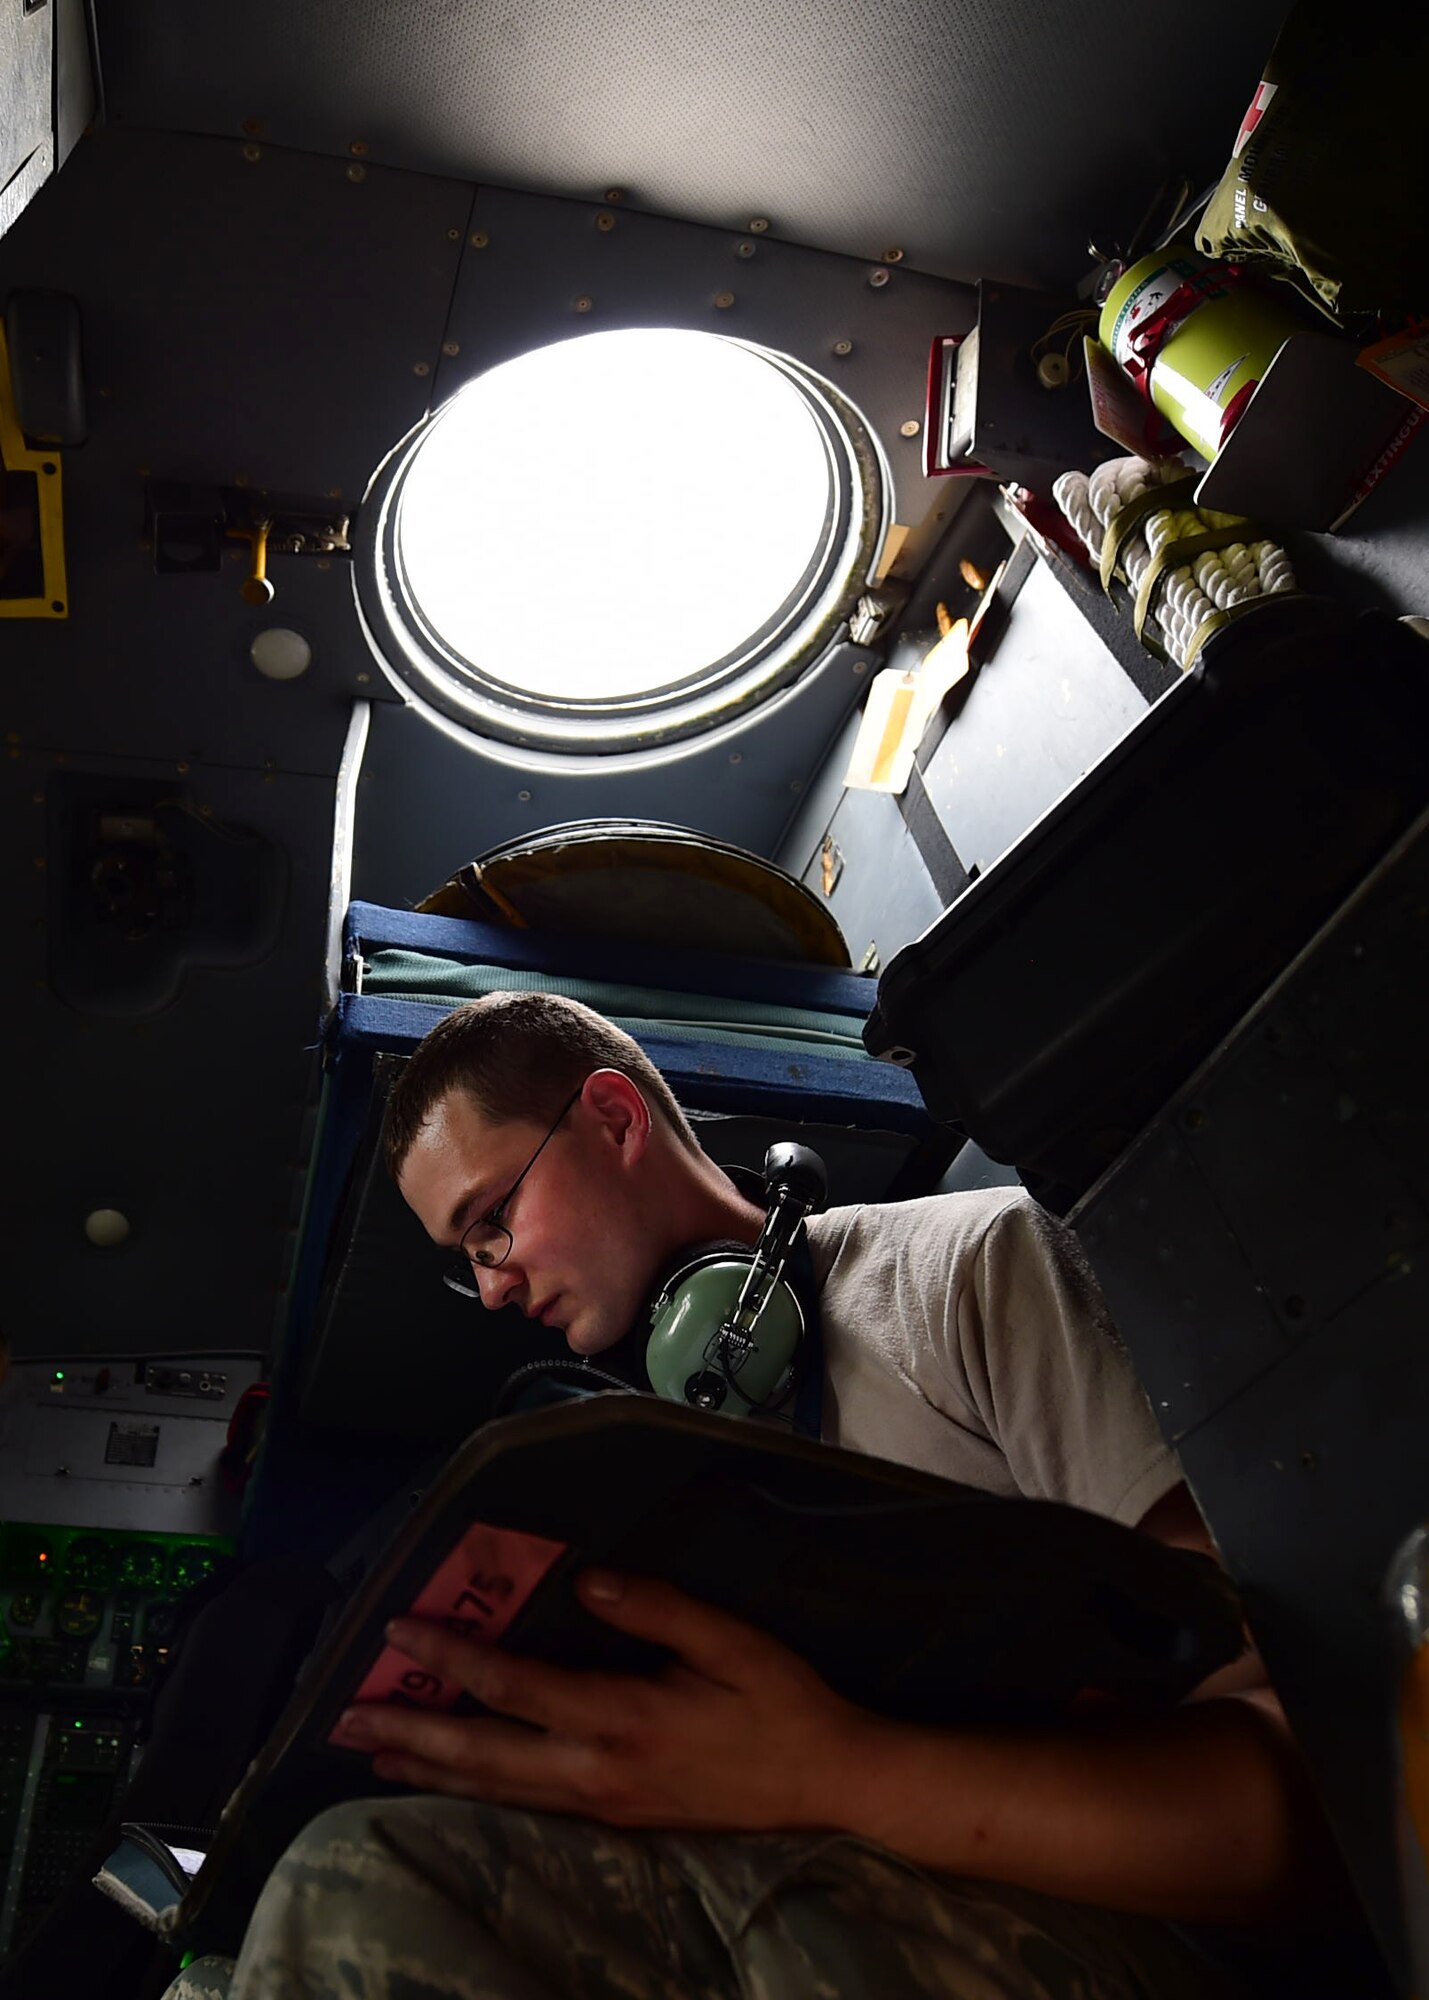 Senior Airman Phillip, 386th Expeditionary Aircraft Maintenance Squadron C-130H Hercules crew chief, goes over his pre-flight checklist at an undisclosed location in Southwest Asia, Oct. 27, 2015. During their deployment, members of the 192nd Airlift Squadron flew more than 600 airlift missions providing airlift, airdrop and reconnaissance support for Operation INHERENT RESOLVE. (U.S. Air Force photo by Staff Sgt. Jerilyn Quintanilla)
